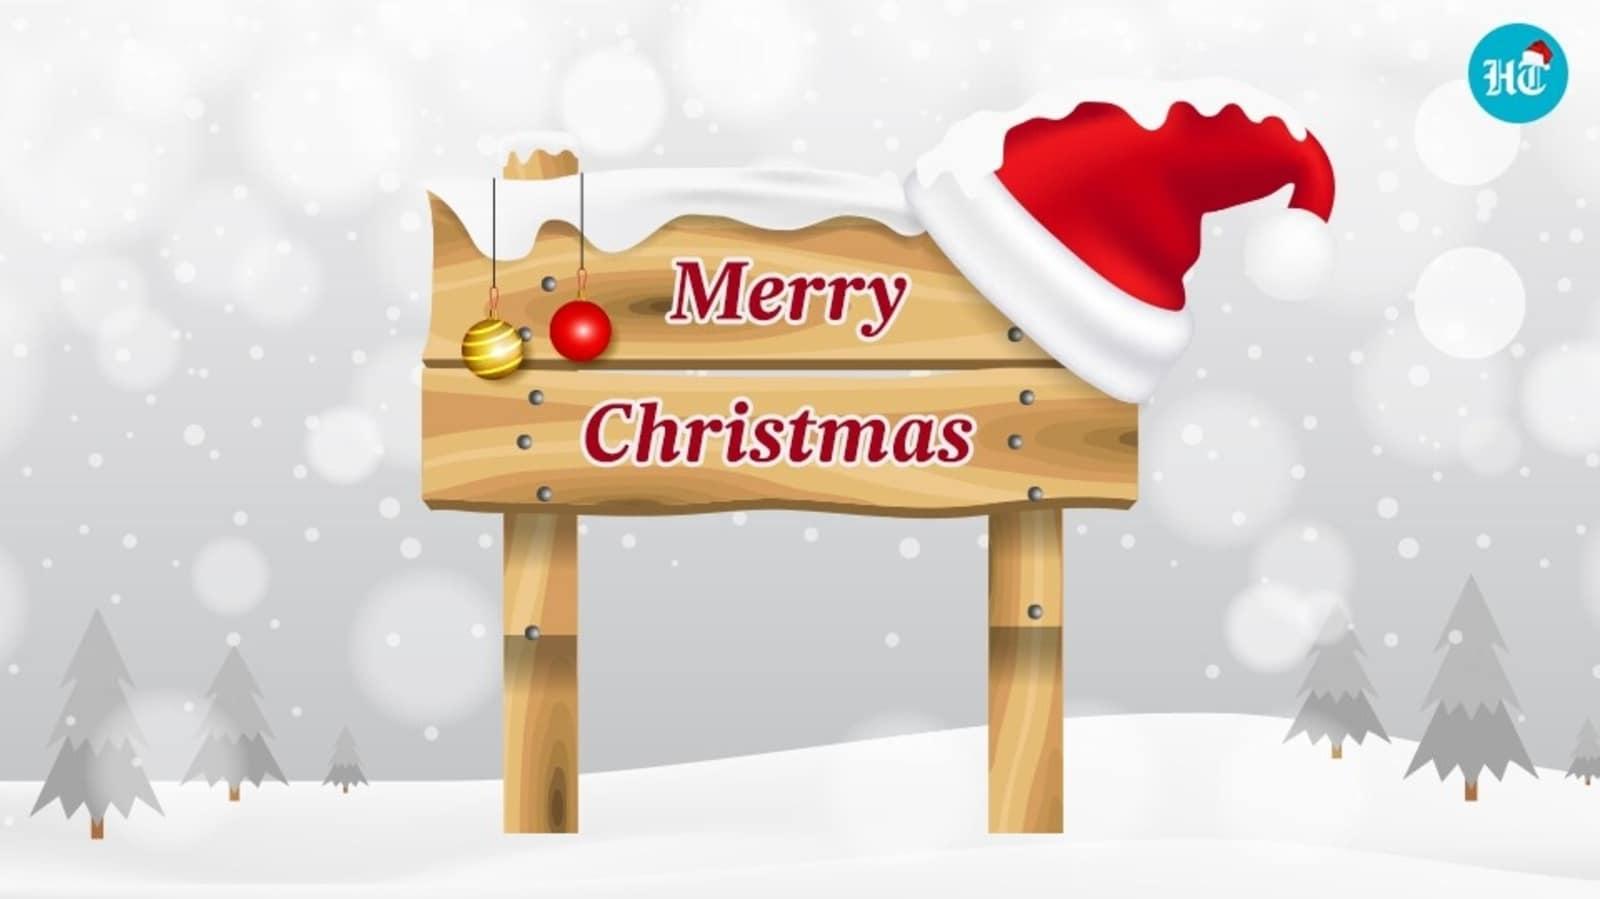 Merry Christmas Unique wishes images and quotes to share